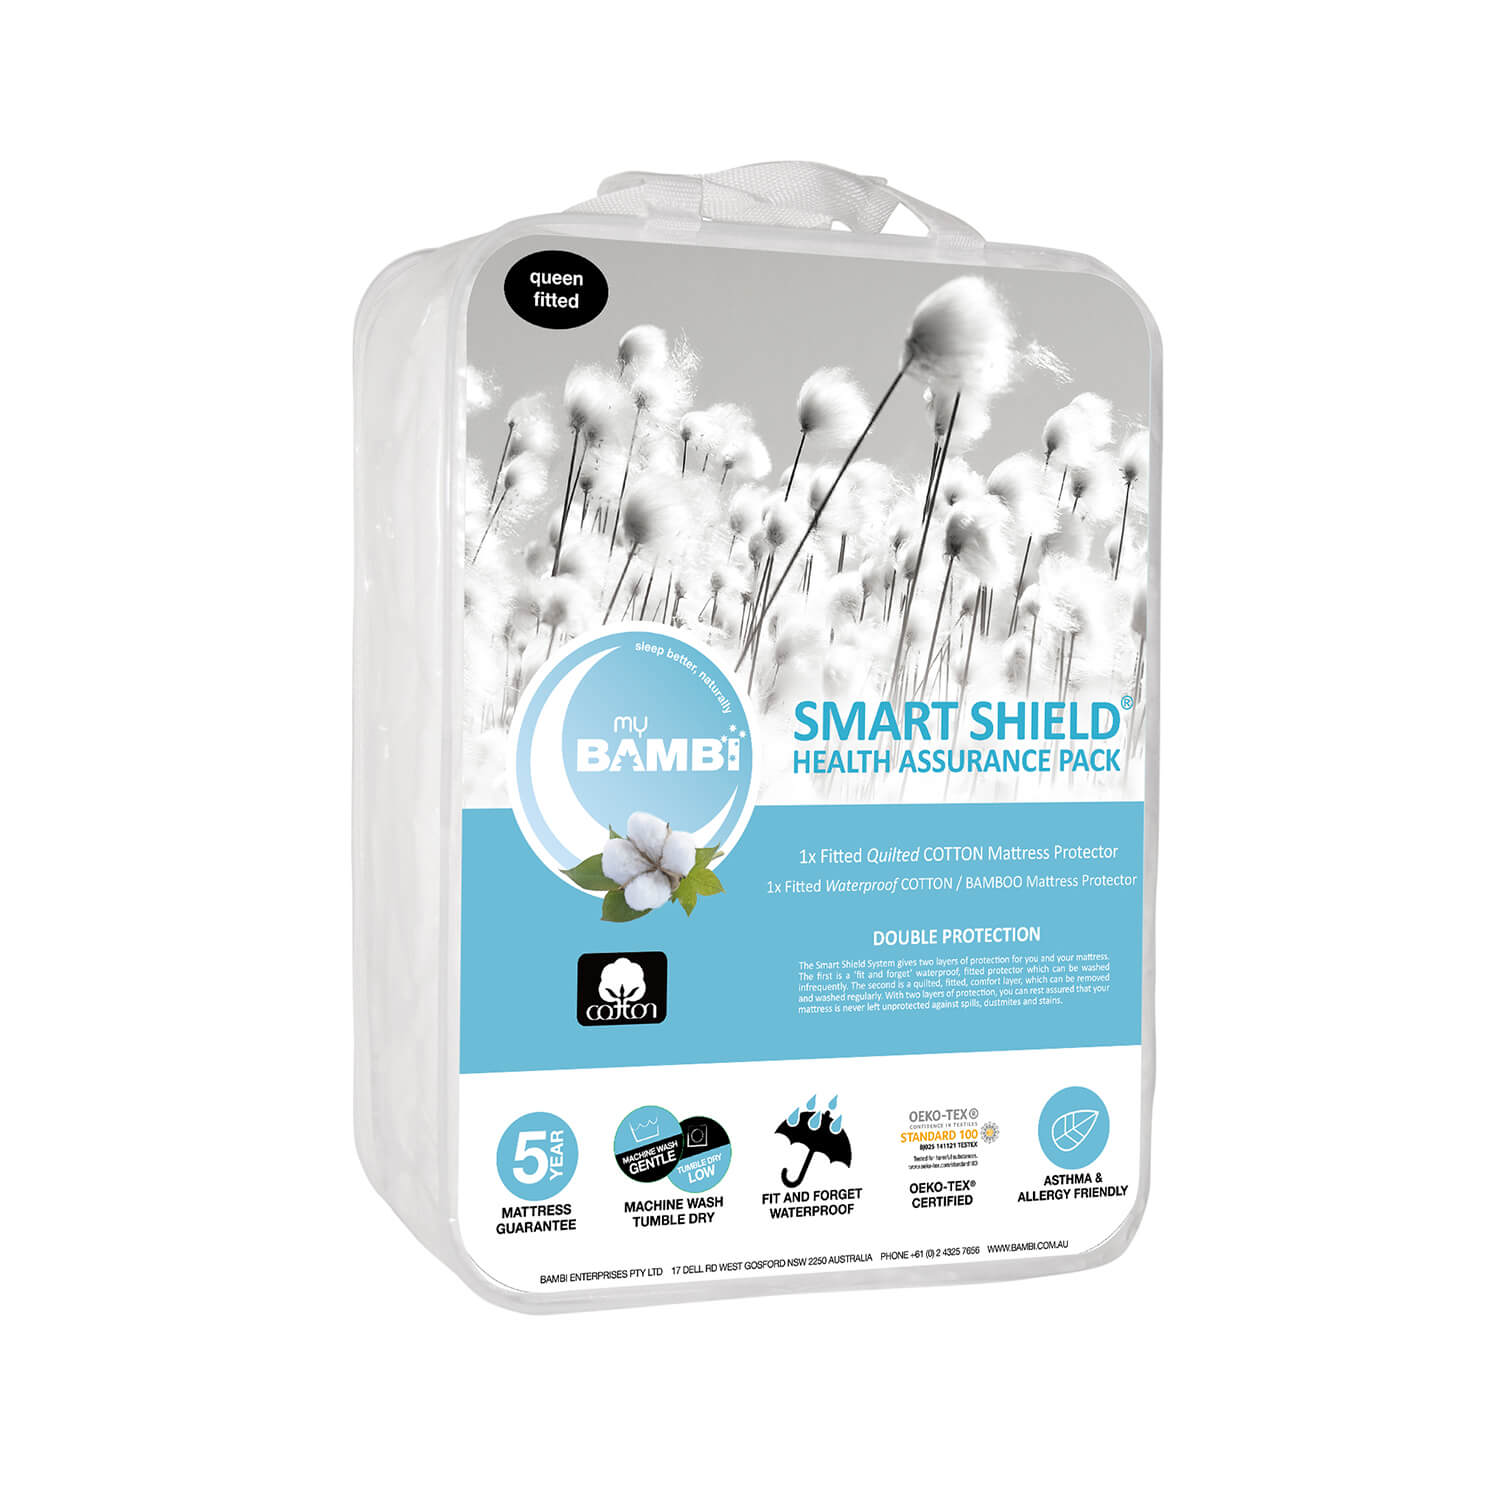 Cotton Mattress Protector – Health Assurance Pack by Bambi